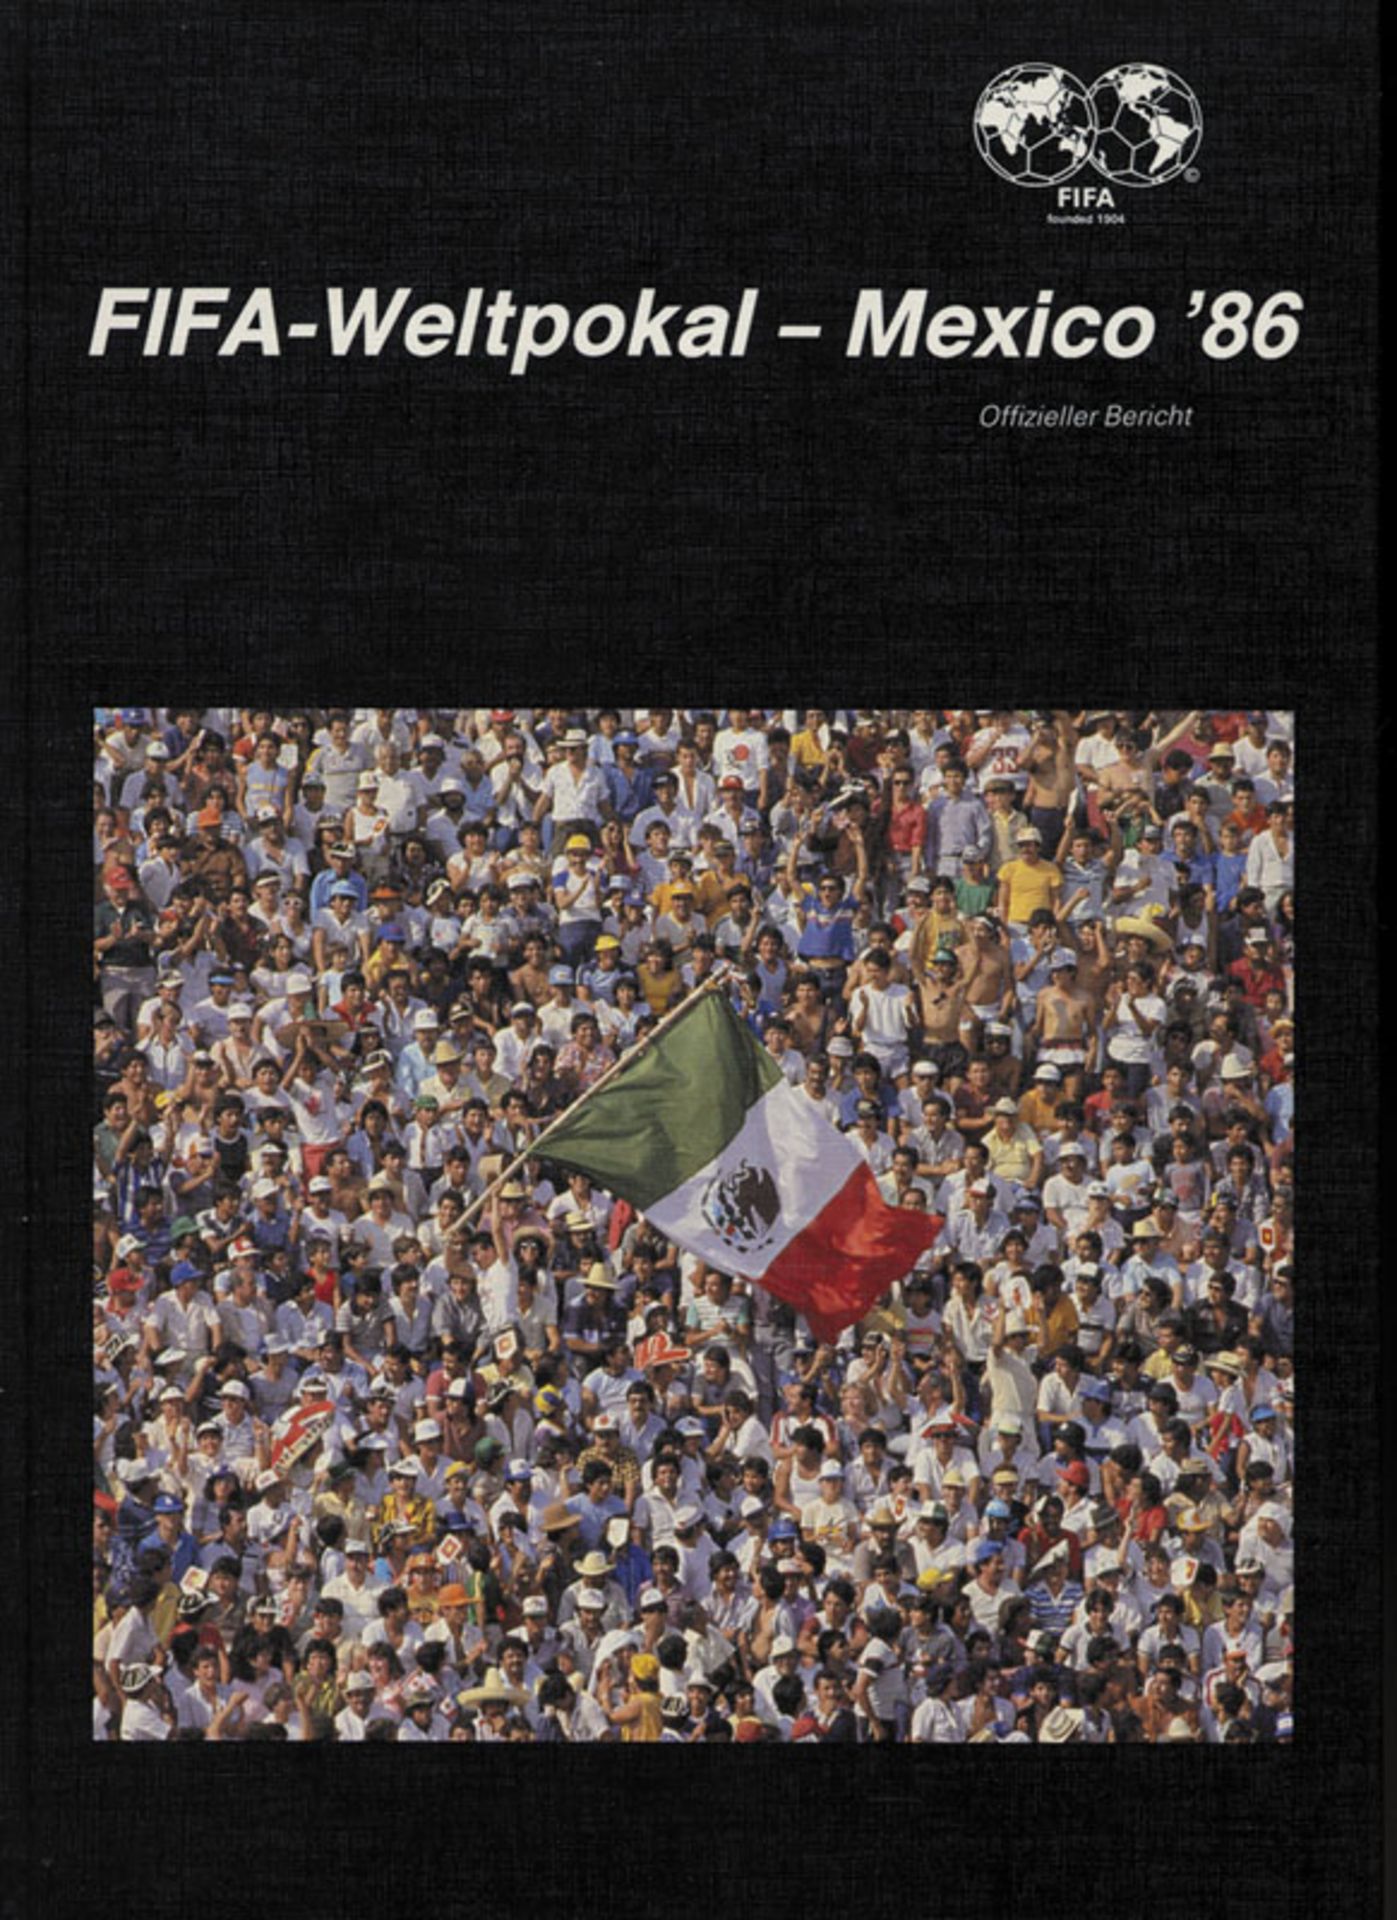 World Cup 1986. Official FIFA Report (GERMAN) - Very rare report of the WC 1986 German Edition, with